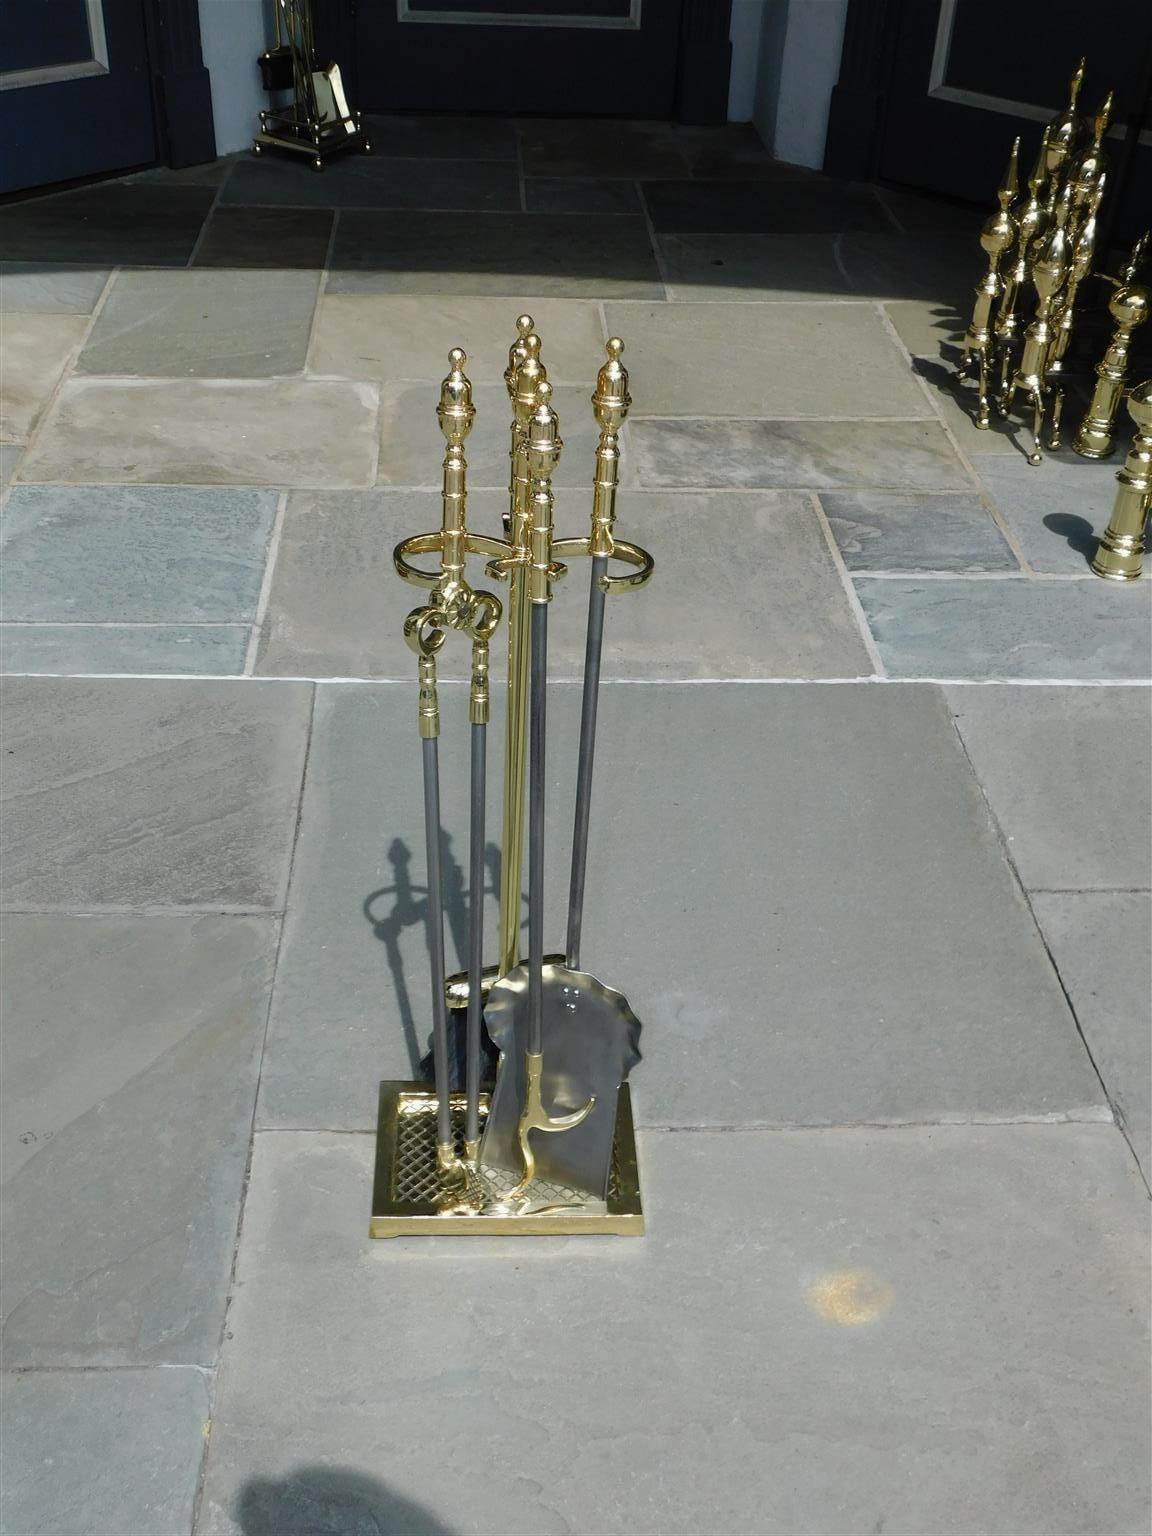 Set of American brass urn ringed finial and polished steel fire place tools on stand. Set consist of tong, poker, shovel, and brush. 19th century.